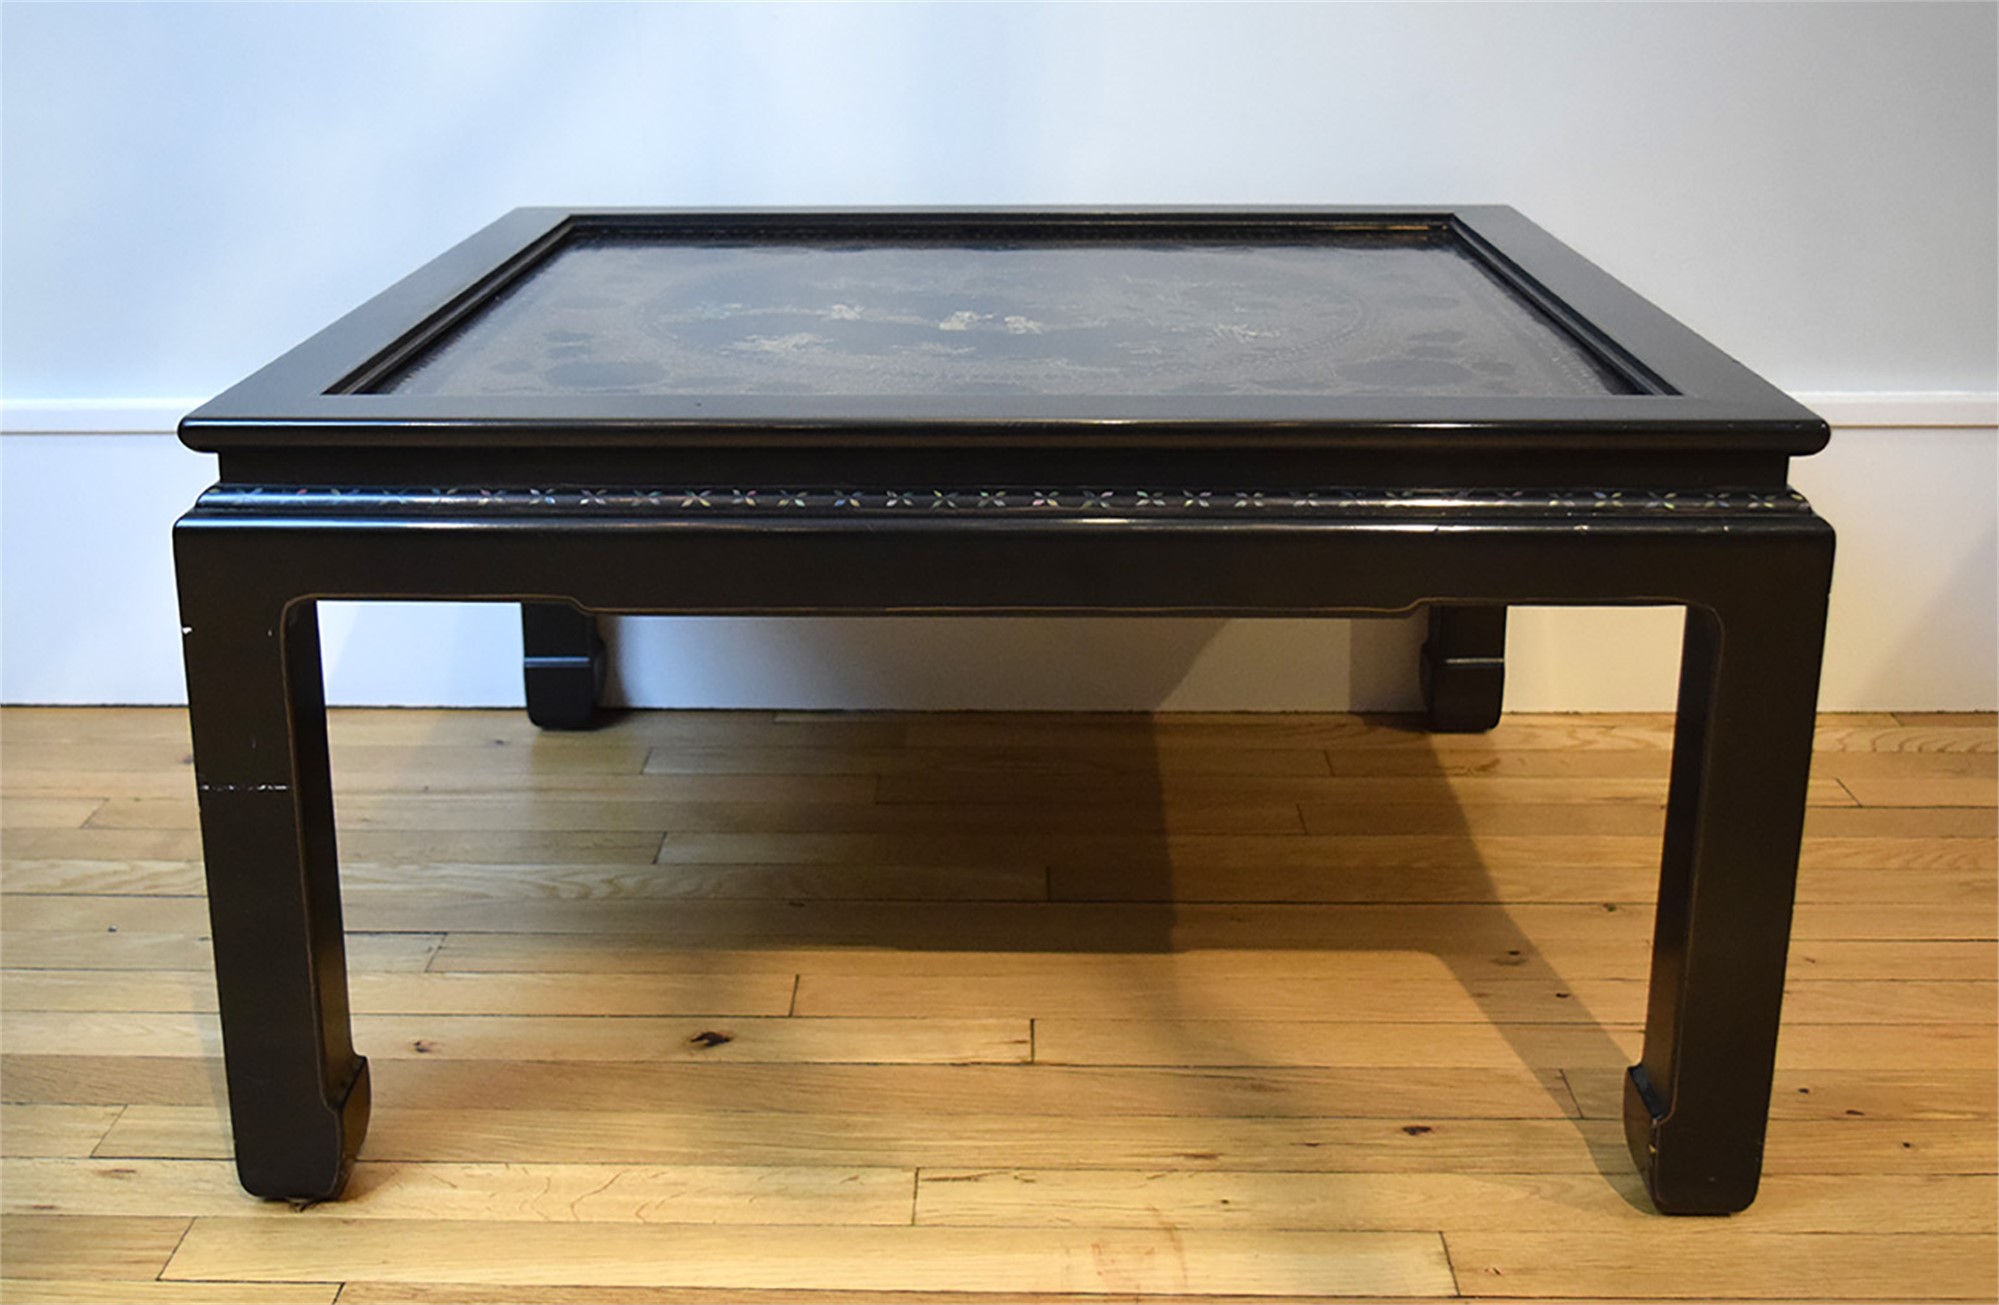 Black Lacquer And Mother Of Pearl Inlaid Low Table The Chinese